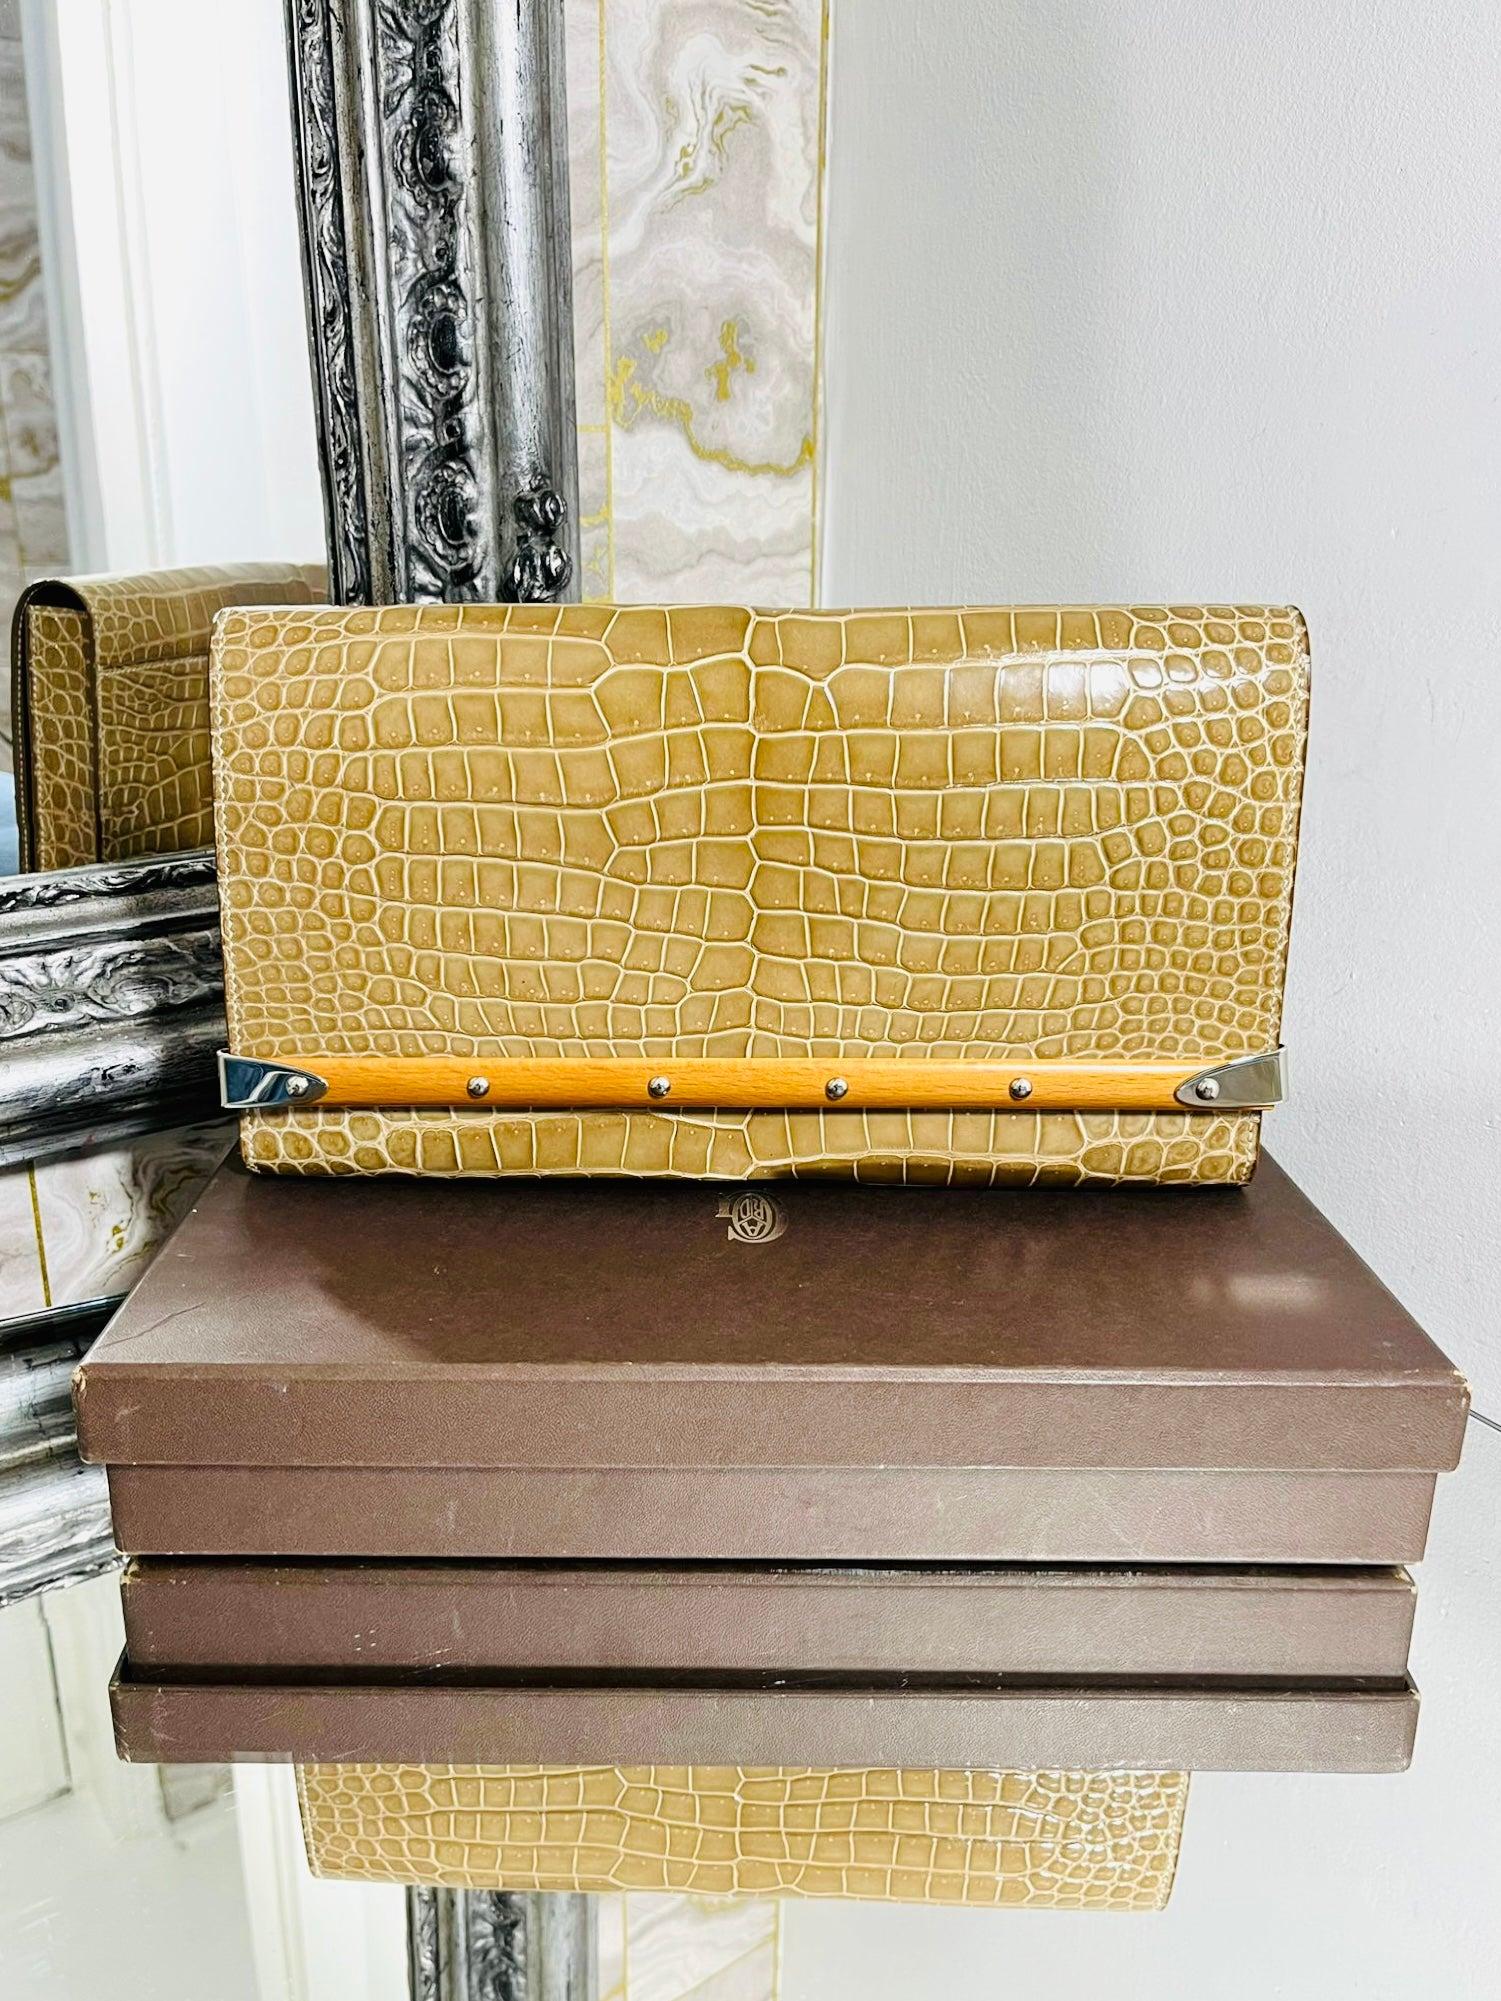 Goyard Monte Carlo Crocodile Skin Clutch Bag - Special Order

Exceptionally rare - Special order in exotic Crocodile skin is the 

iconic model. Flap front with signature wood strap finish with silver rivets.

Size - Height 17cm, Width 30cm, Depth